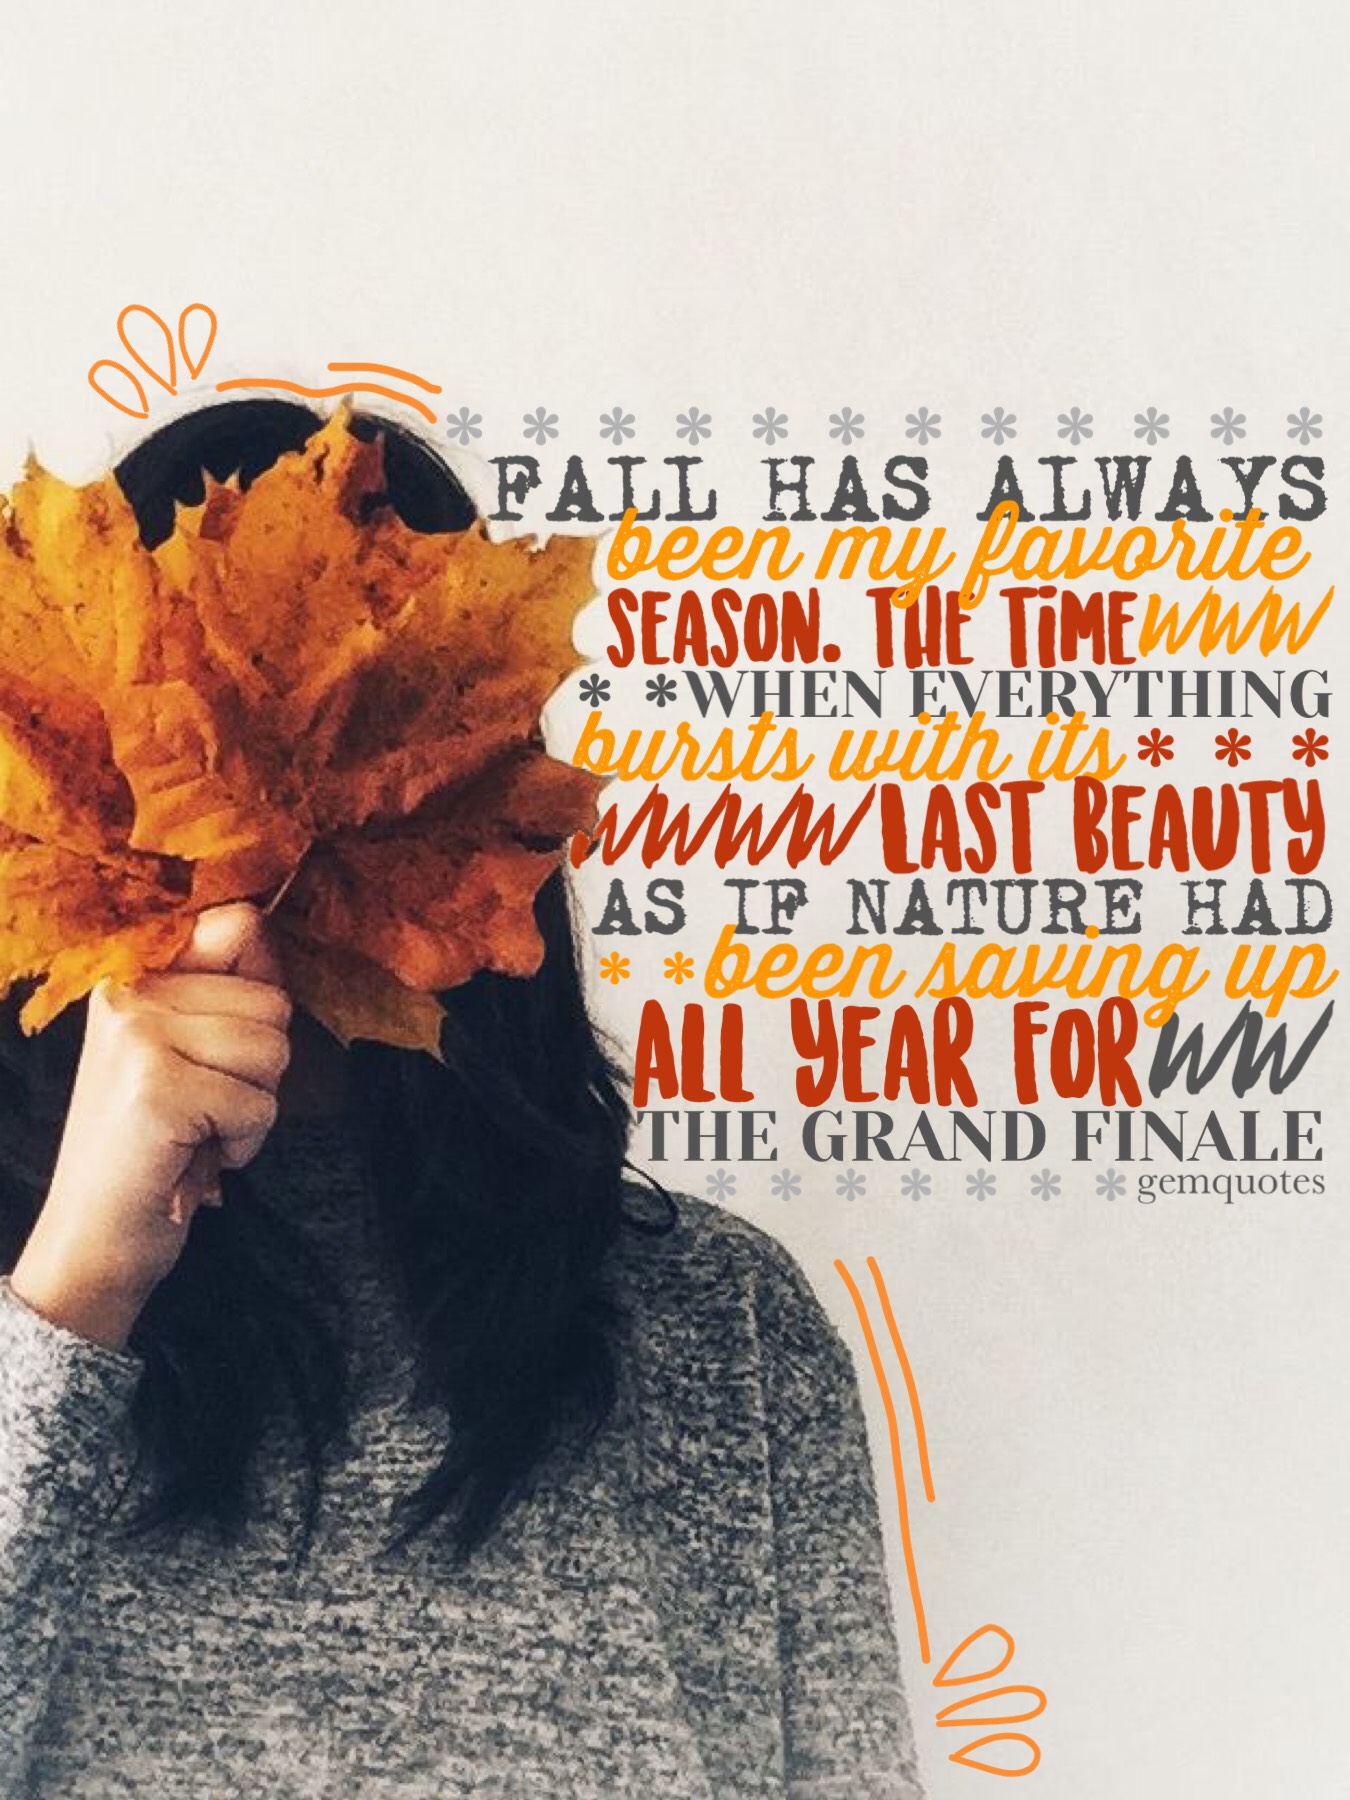 “🍂tap🍂”
A little autumn collage for u gems! Listening to “Cell Block Tango” and honestly, really likin’ it😂 it’s pretty dark, though. Hoping u guys are doing well! Tysm for all ur sweet words, love u all! Sending some fall vibes and cool breezes~~🍁🌬